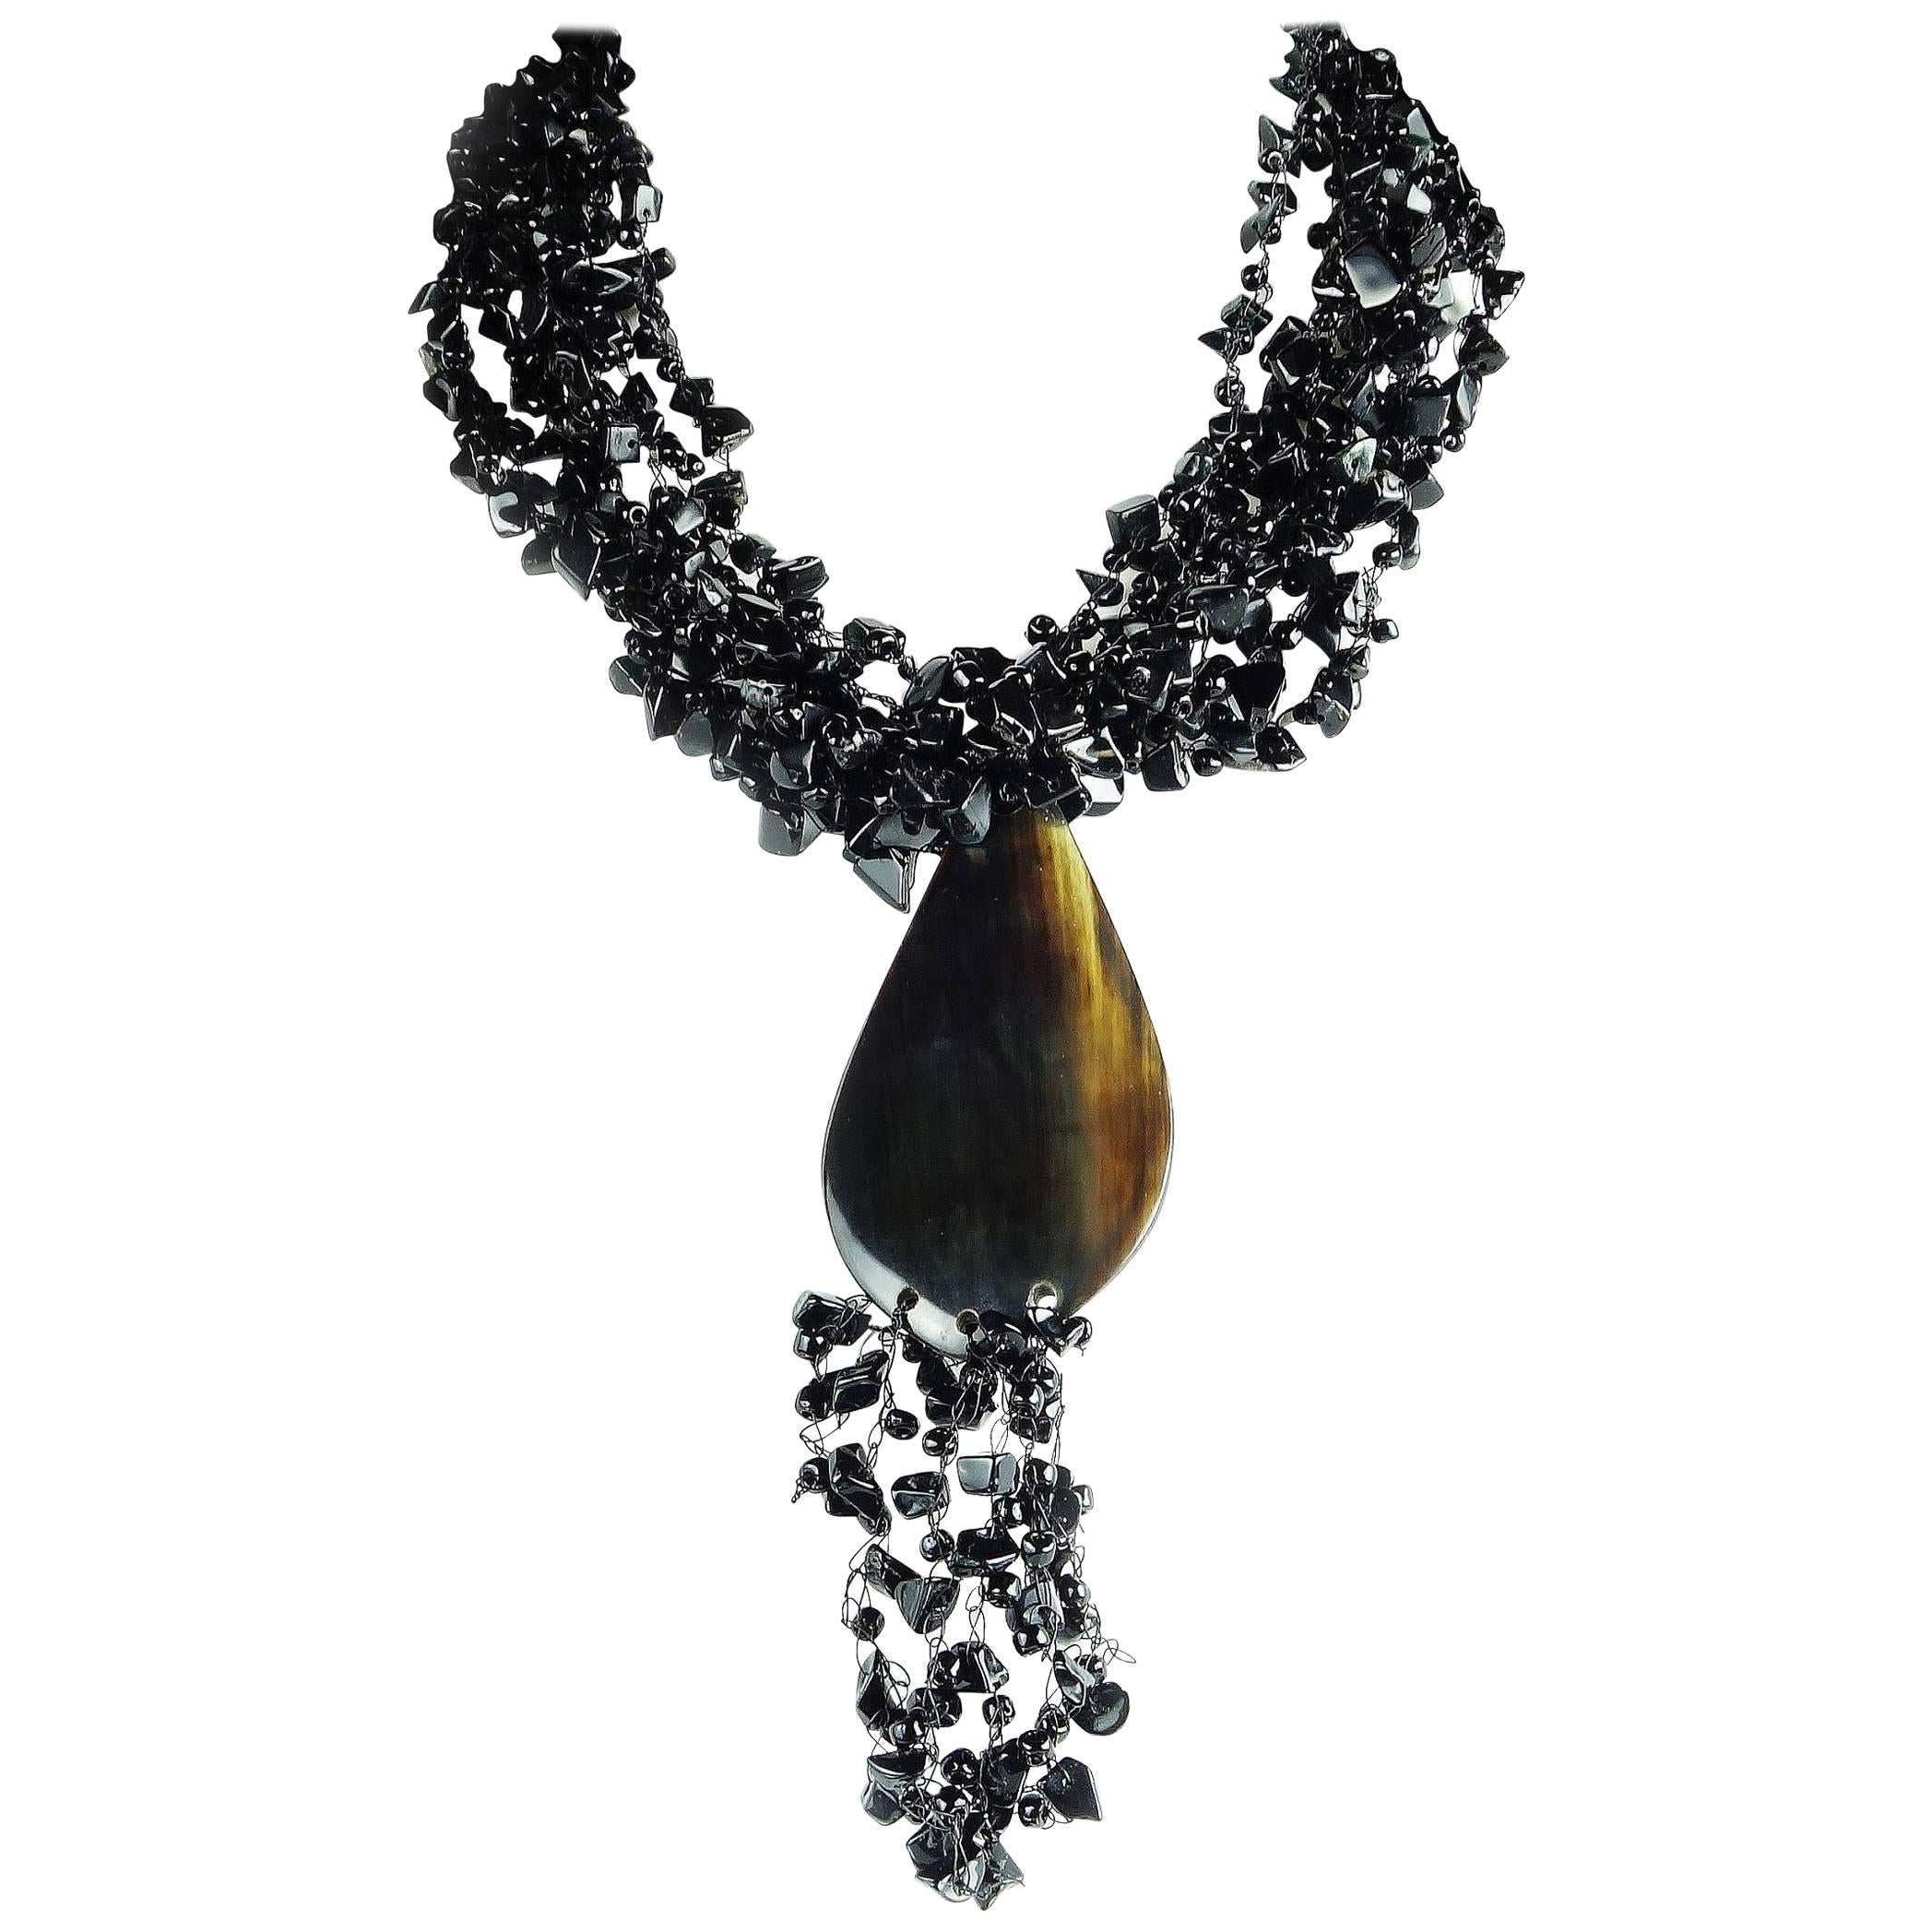 Eight strands of Polished Onyx chips in 18 inch Necklace culminating in horn pendant and tassels of more chips. The Onyx chips are loosely woven together to create an airy look. Statement in Black! 